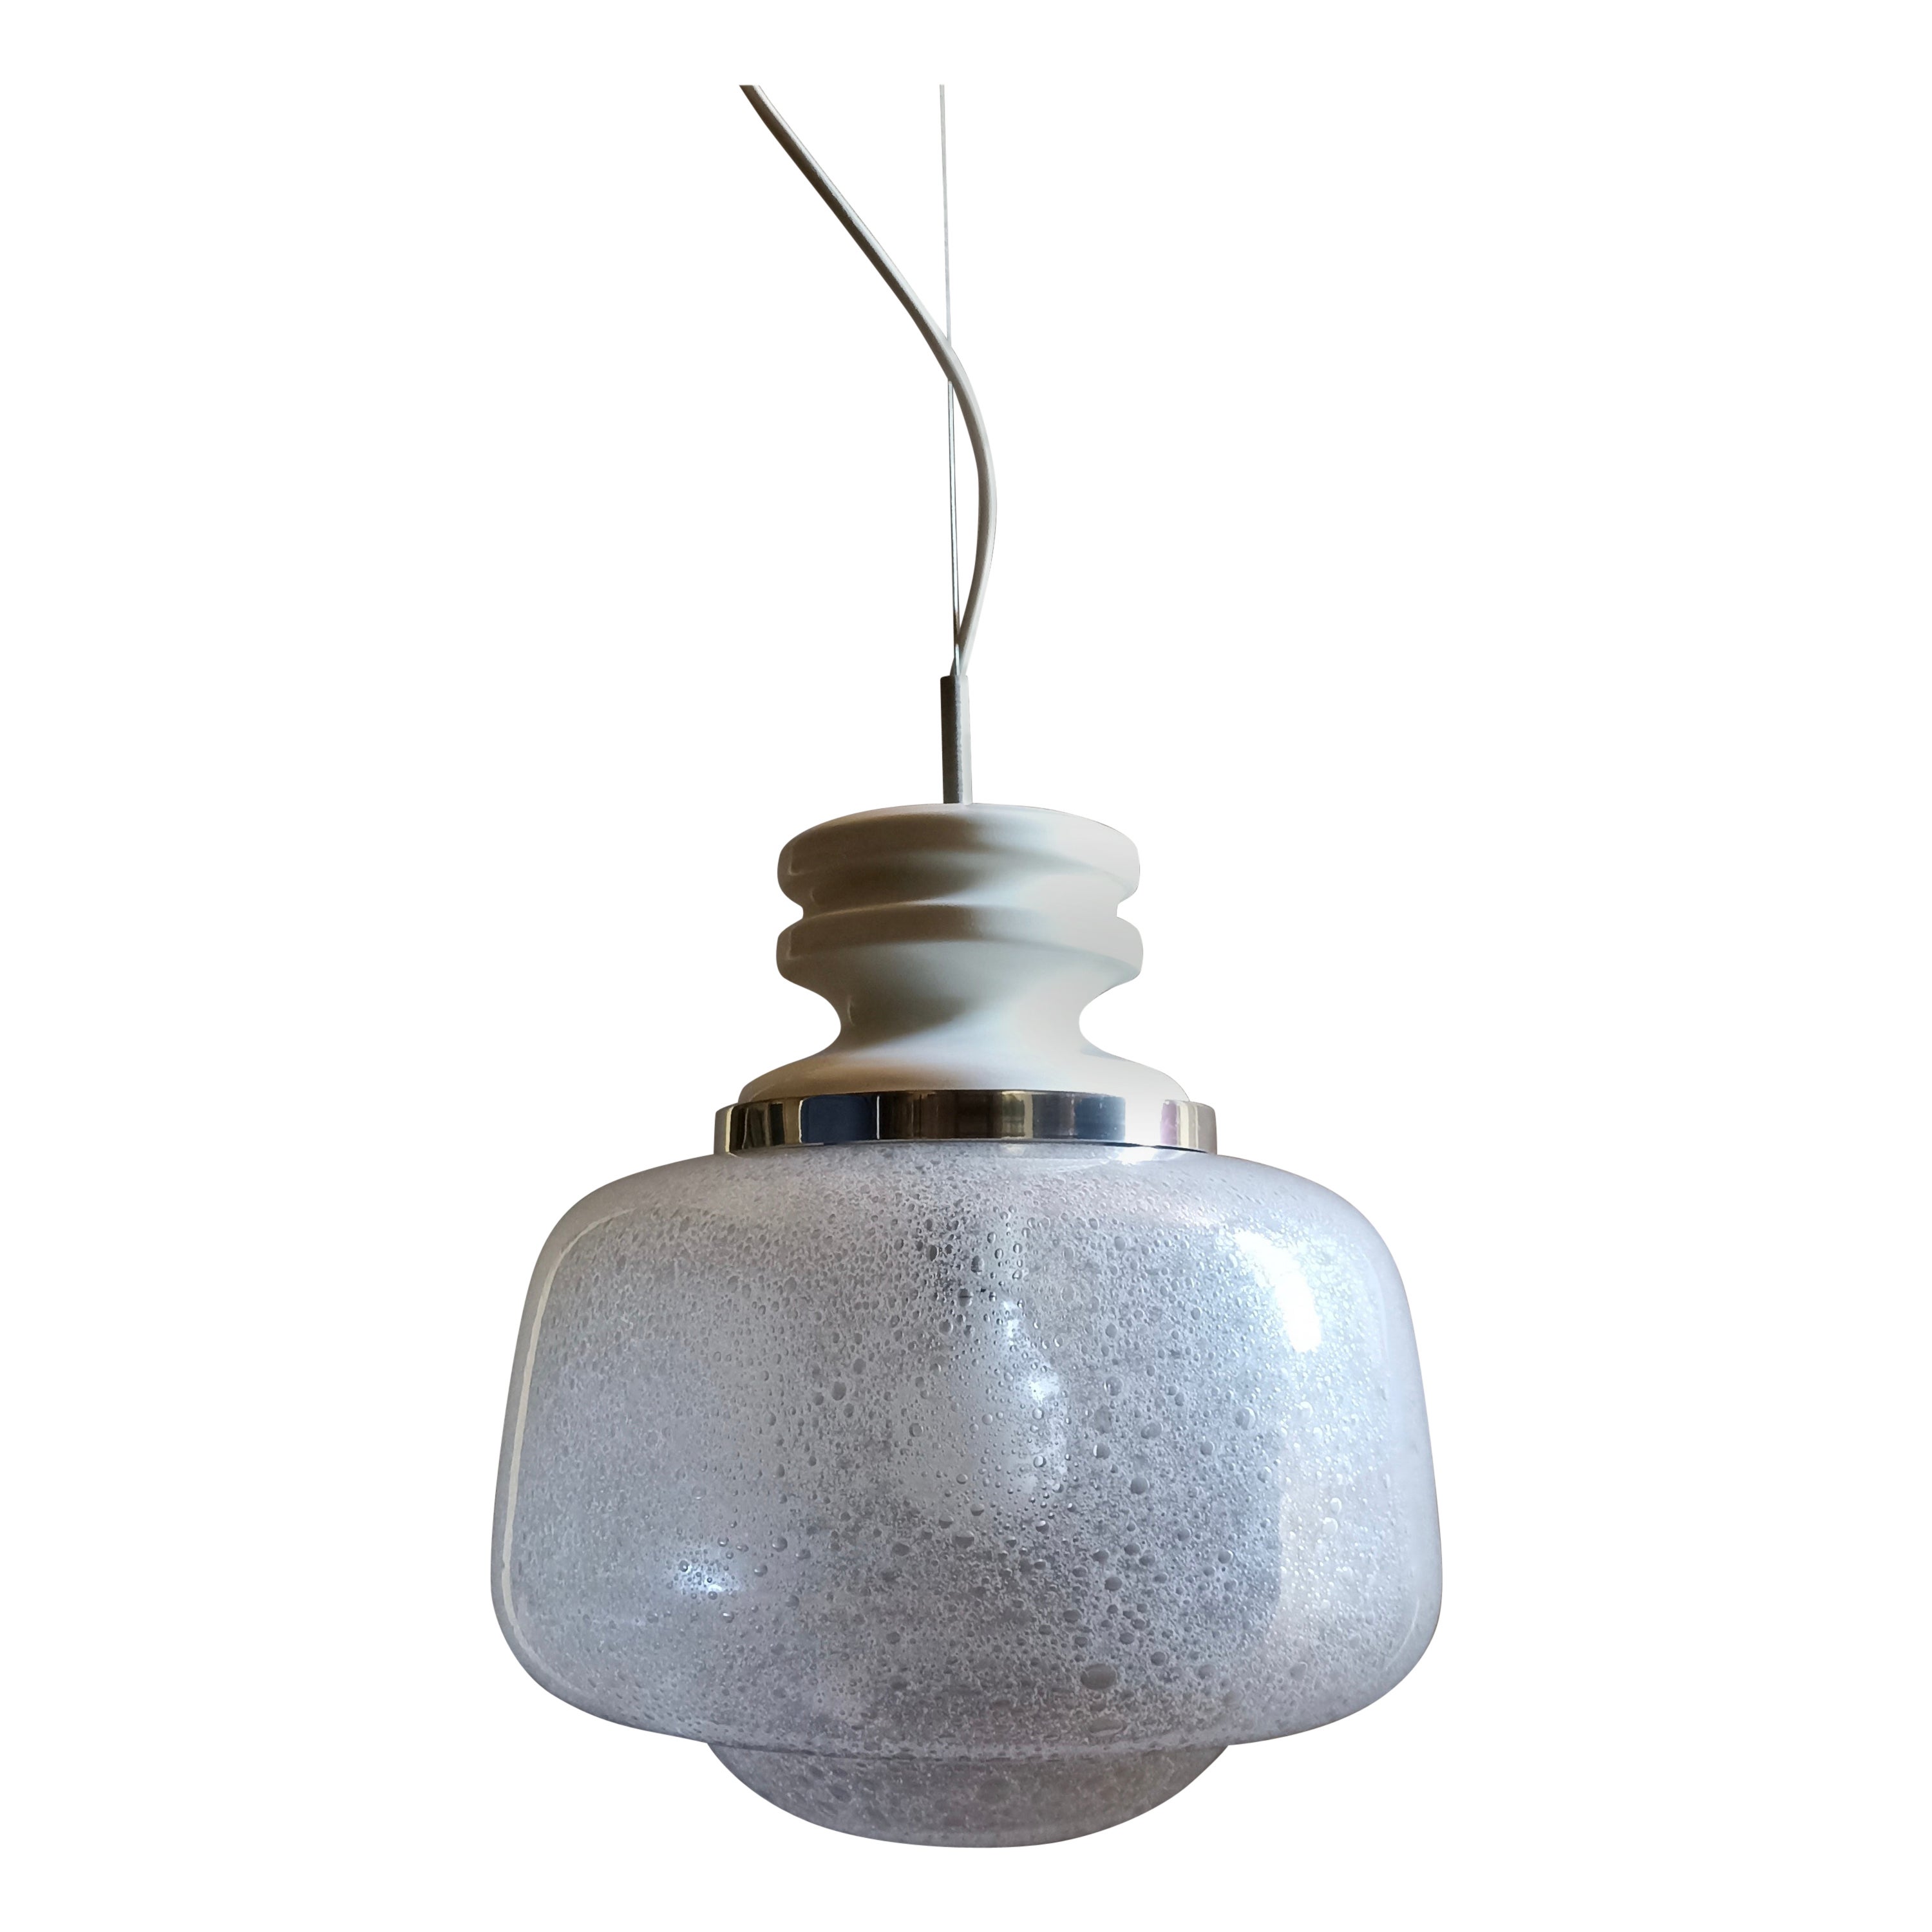 1960s Murano "Pulegoso" glass and aluminum Space Age one-light pendant lamp  For Sale